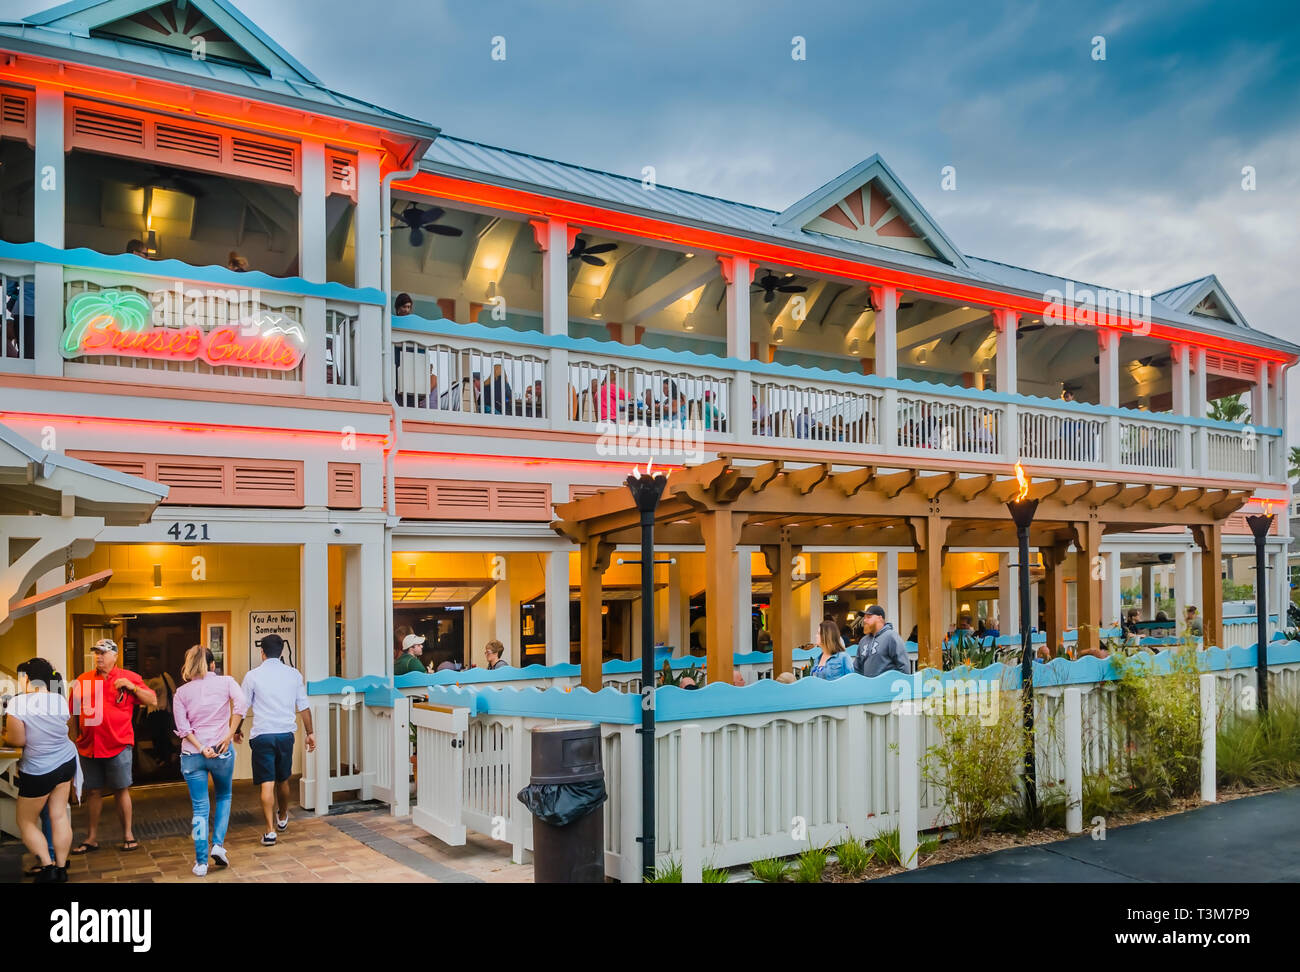 The sun sets on the Sunset Grille, March 19, 2016, in St. Augustine, Florida. The restaurant opened in 1990 and offers a laidback, Key West atmosphere. Stock Photo